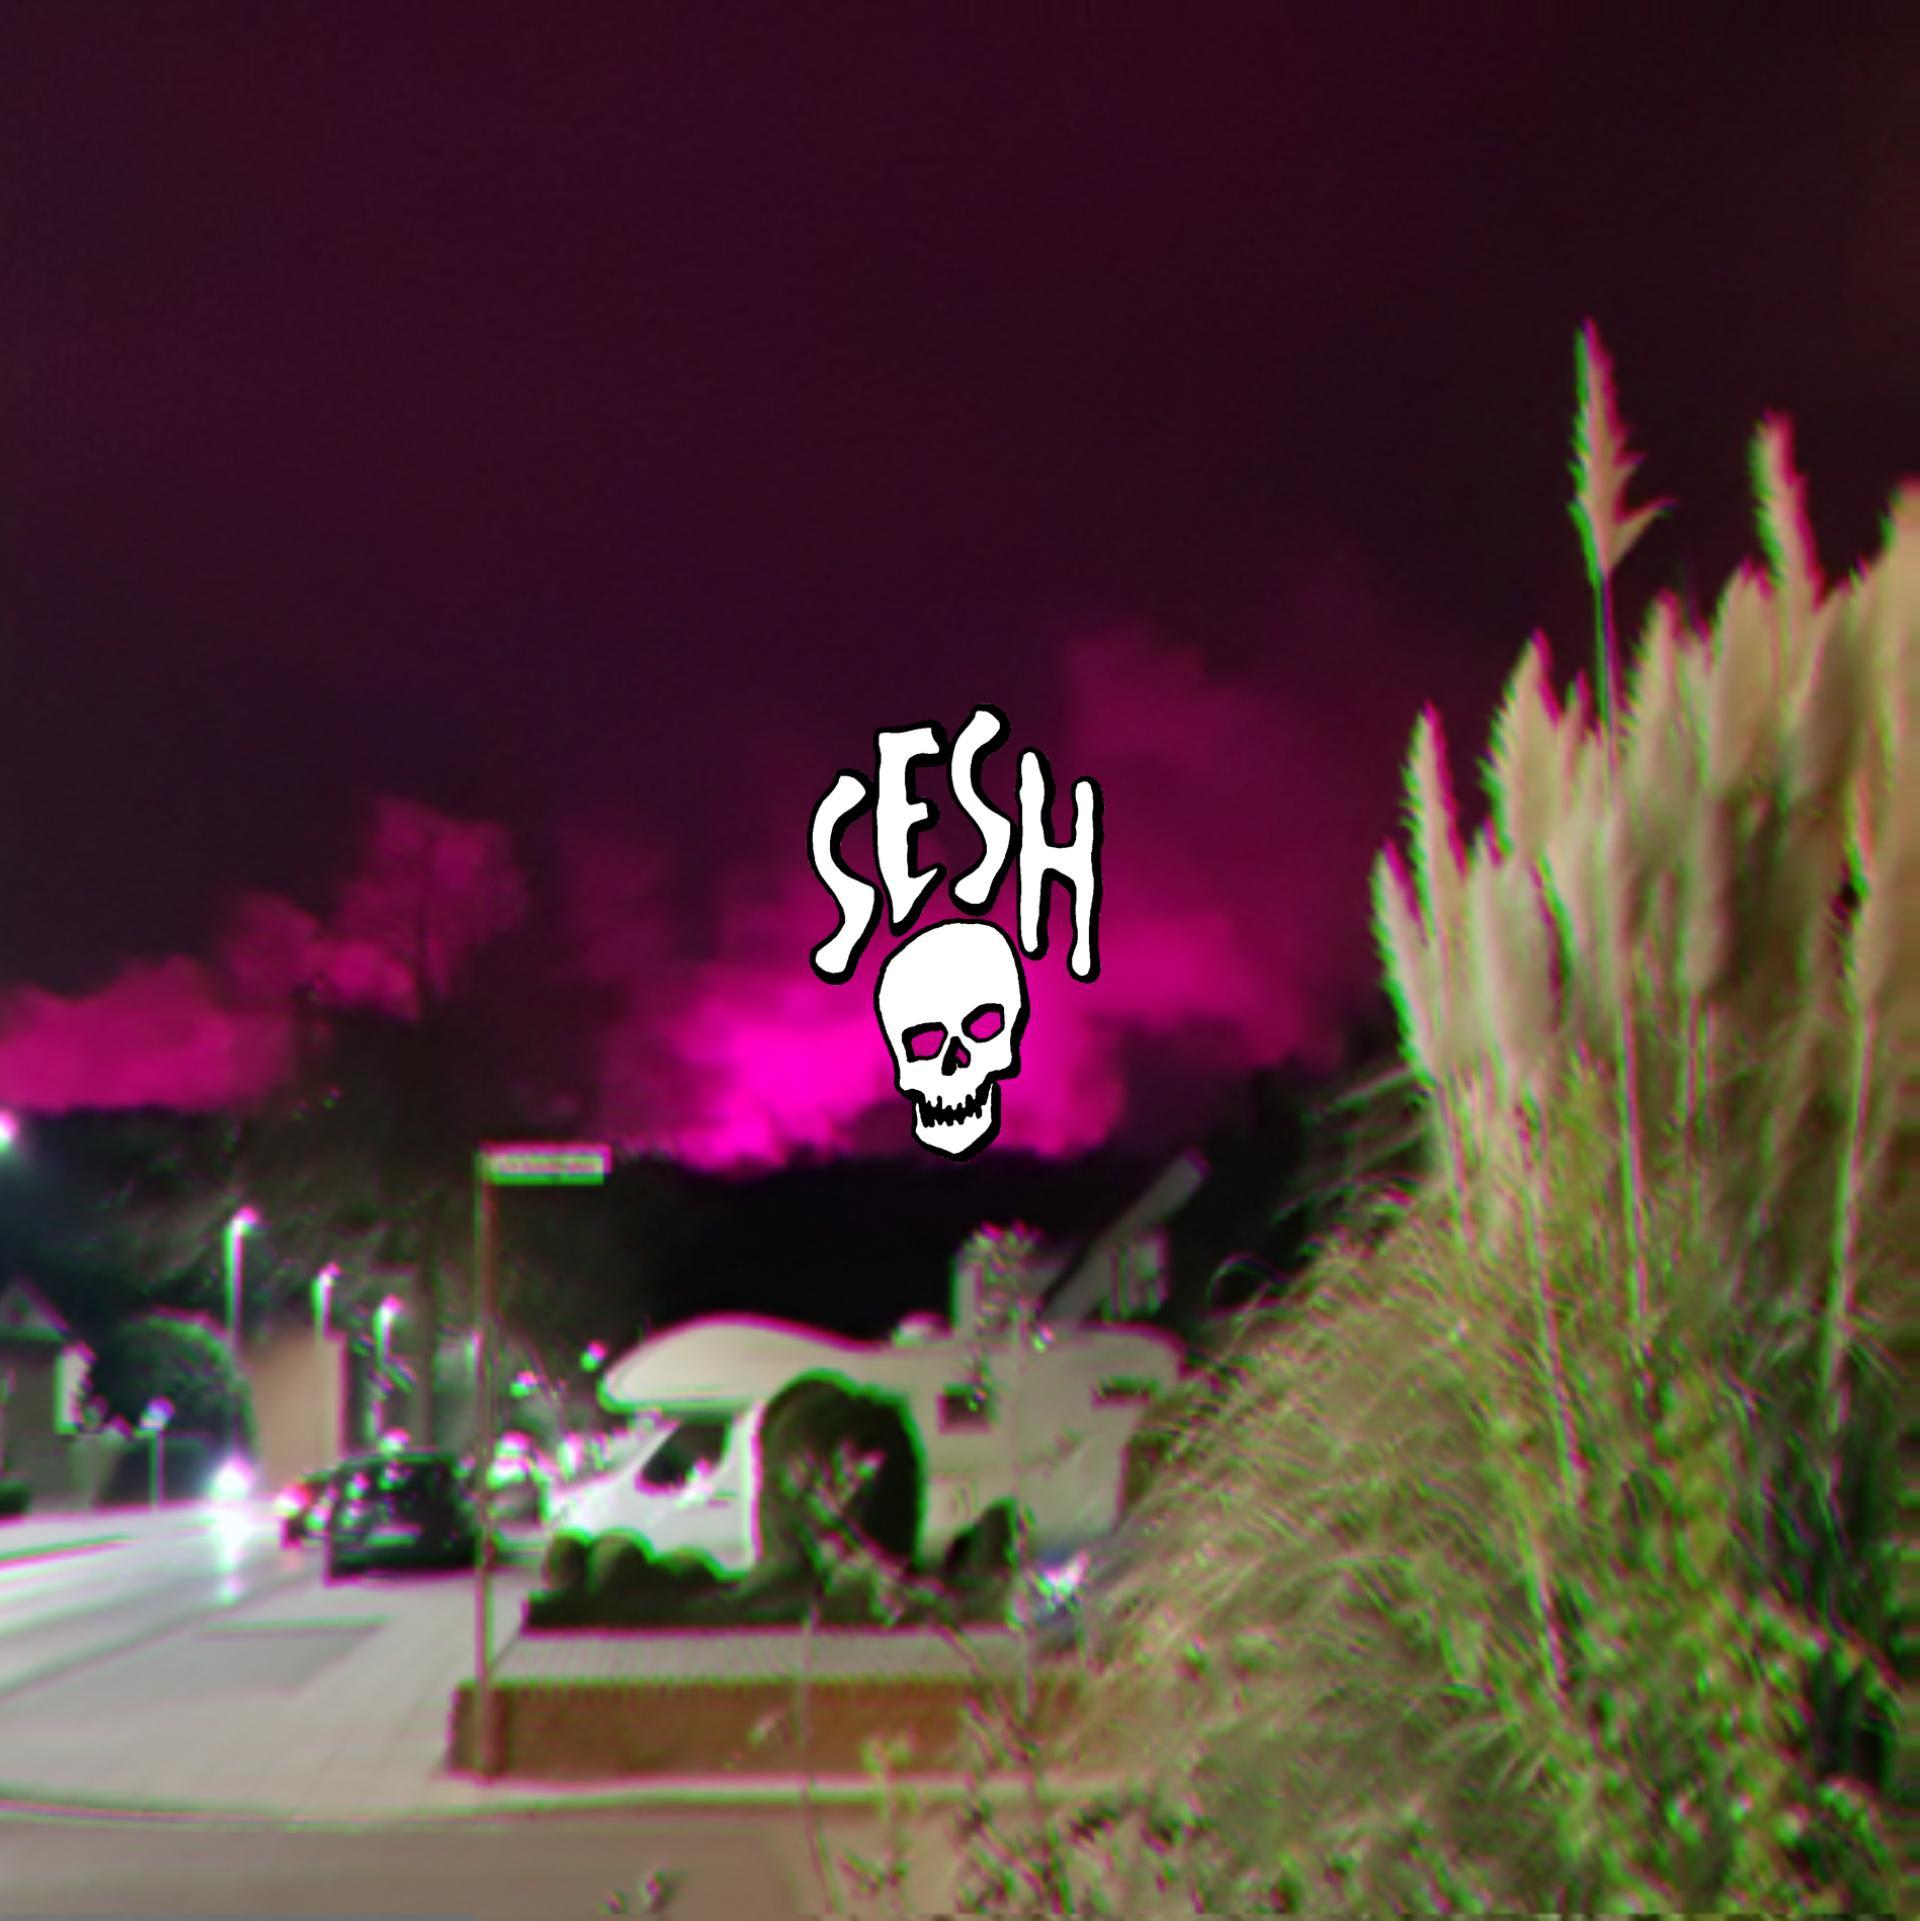 SESHSkull. Thought this looked nice as a wallpaper or